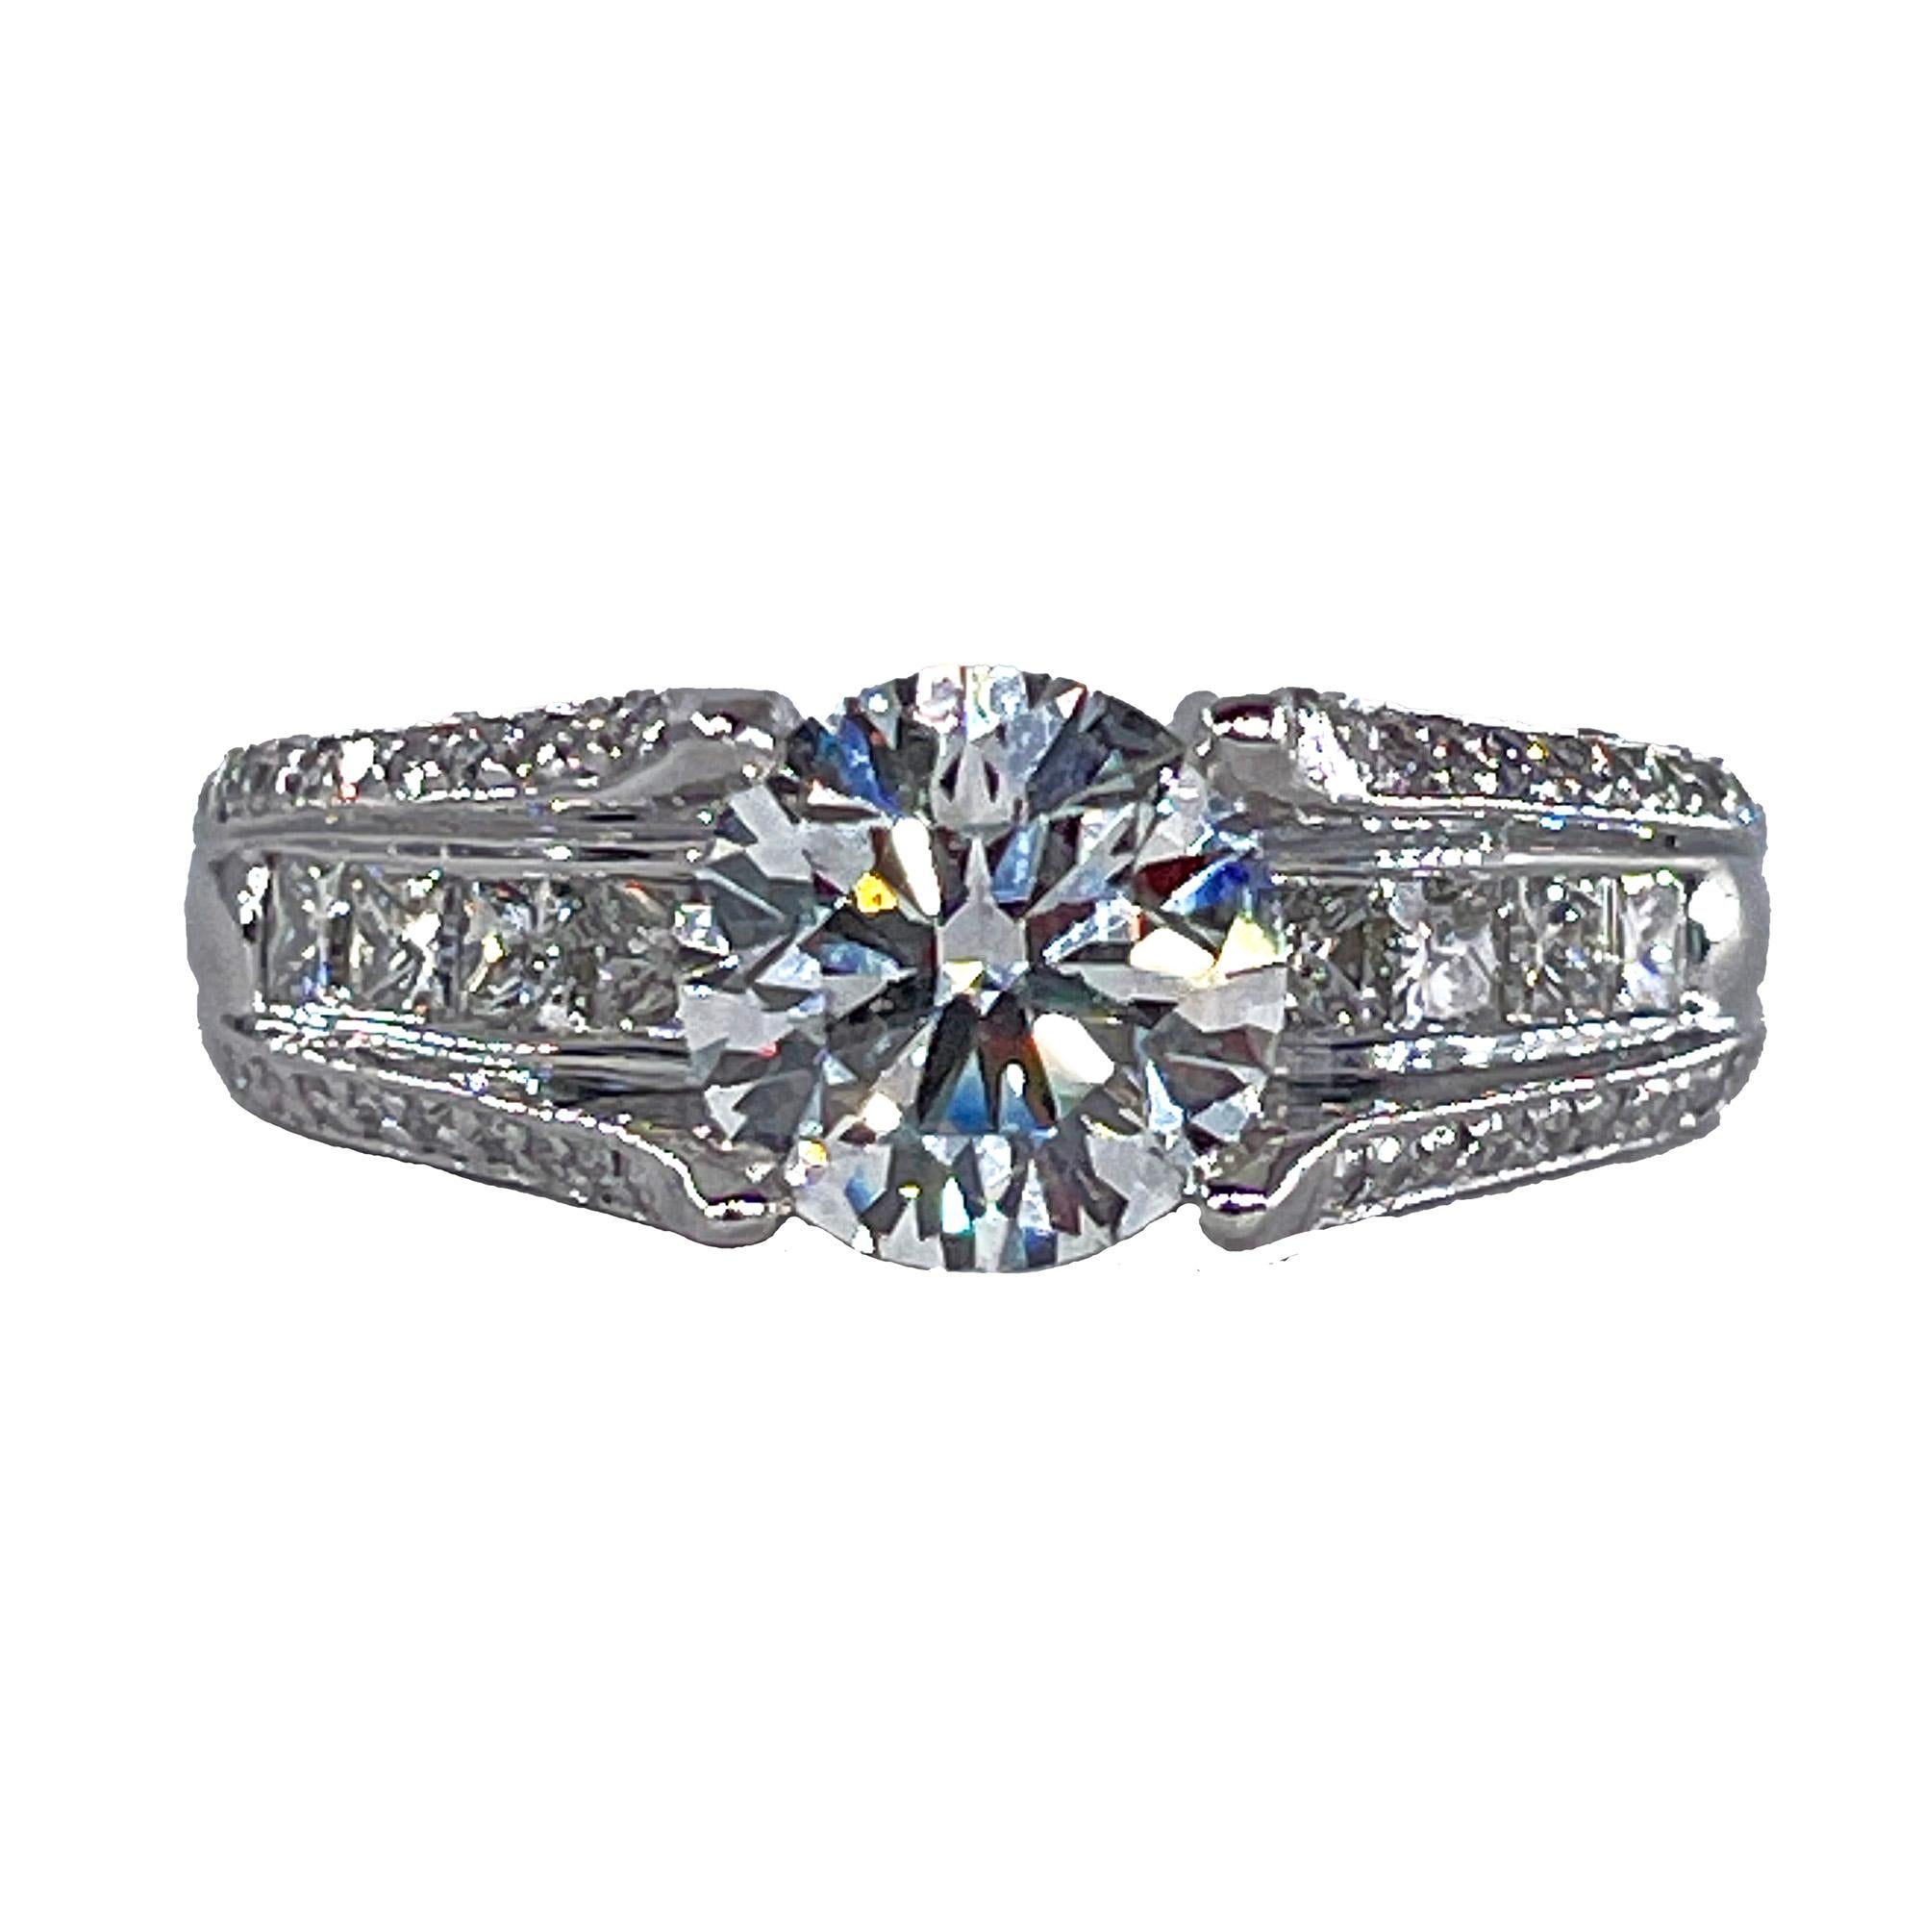 To anyone who doesn't want plain solitaire but is tired of a diamond halo style...
If you are looking for the perfect ring to tell her how much you love her, look no further. Buy her this exquisite and the most classic, elegant diamond ring which